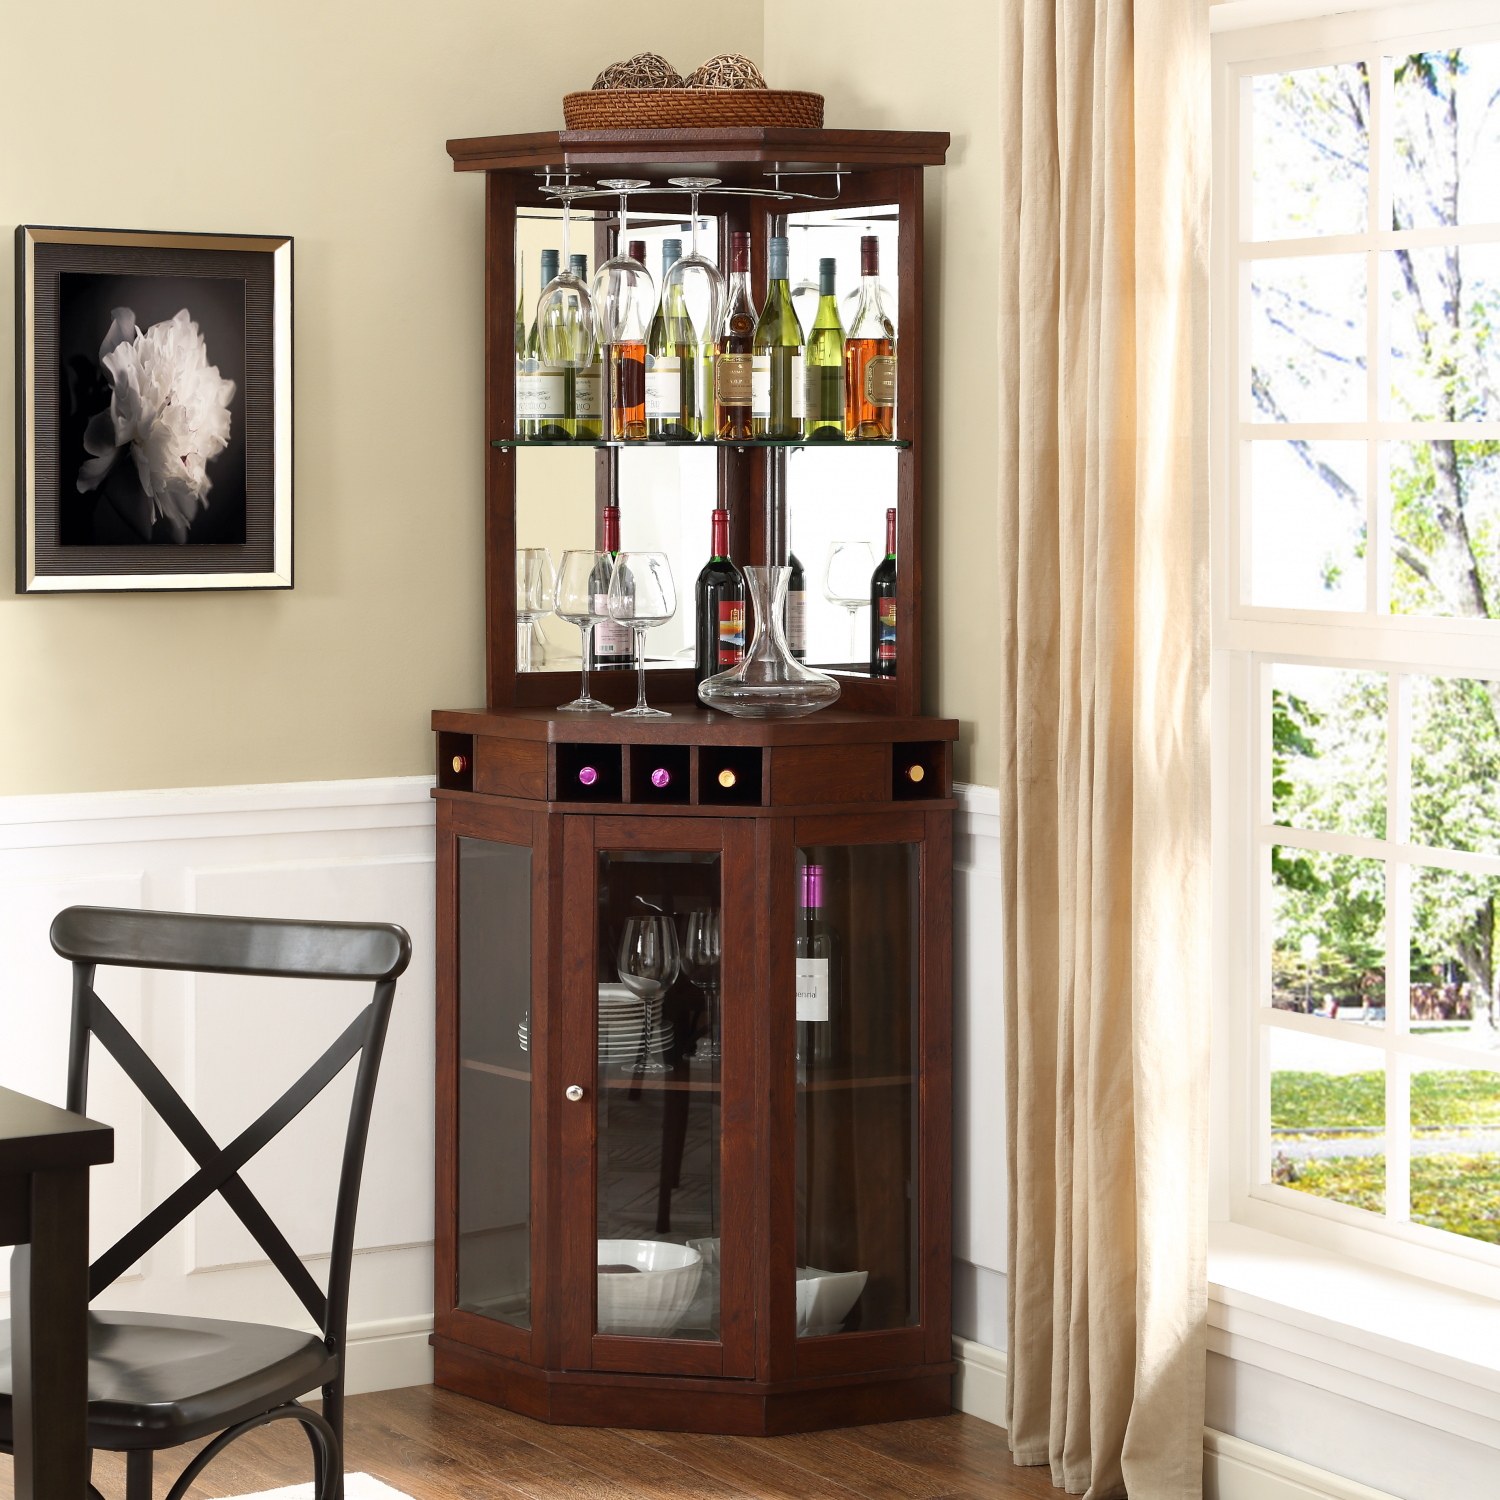 Details About Mini Bars Liquor Cabinet Whiskey Cabinets Wine Storage Wooden Home Bar Furniture for size 1500 X 1500